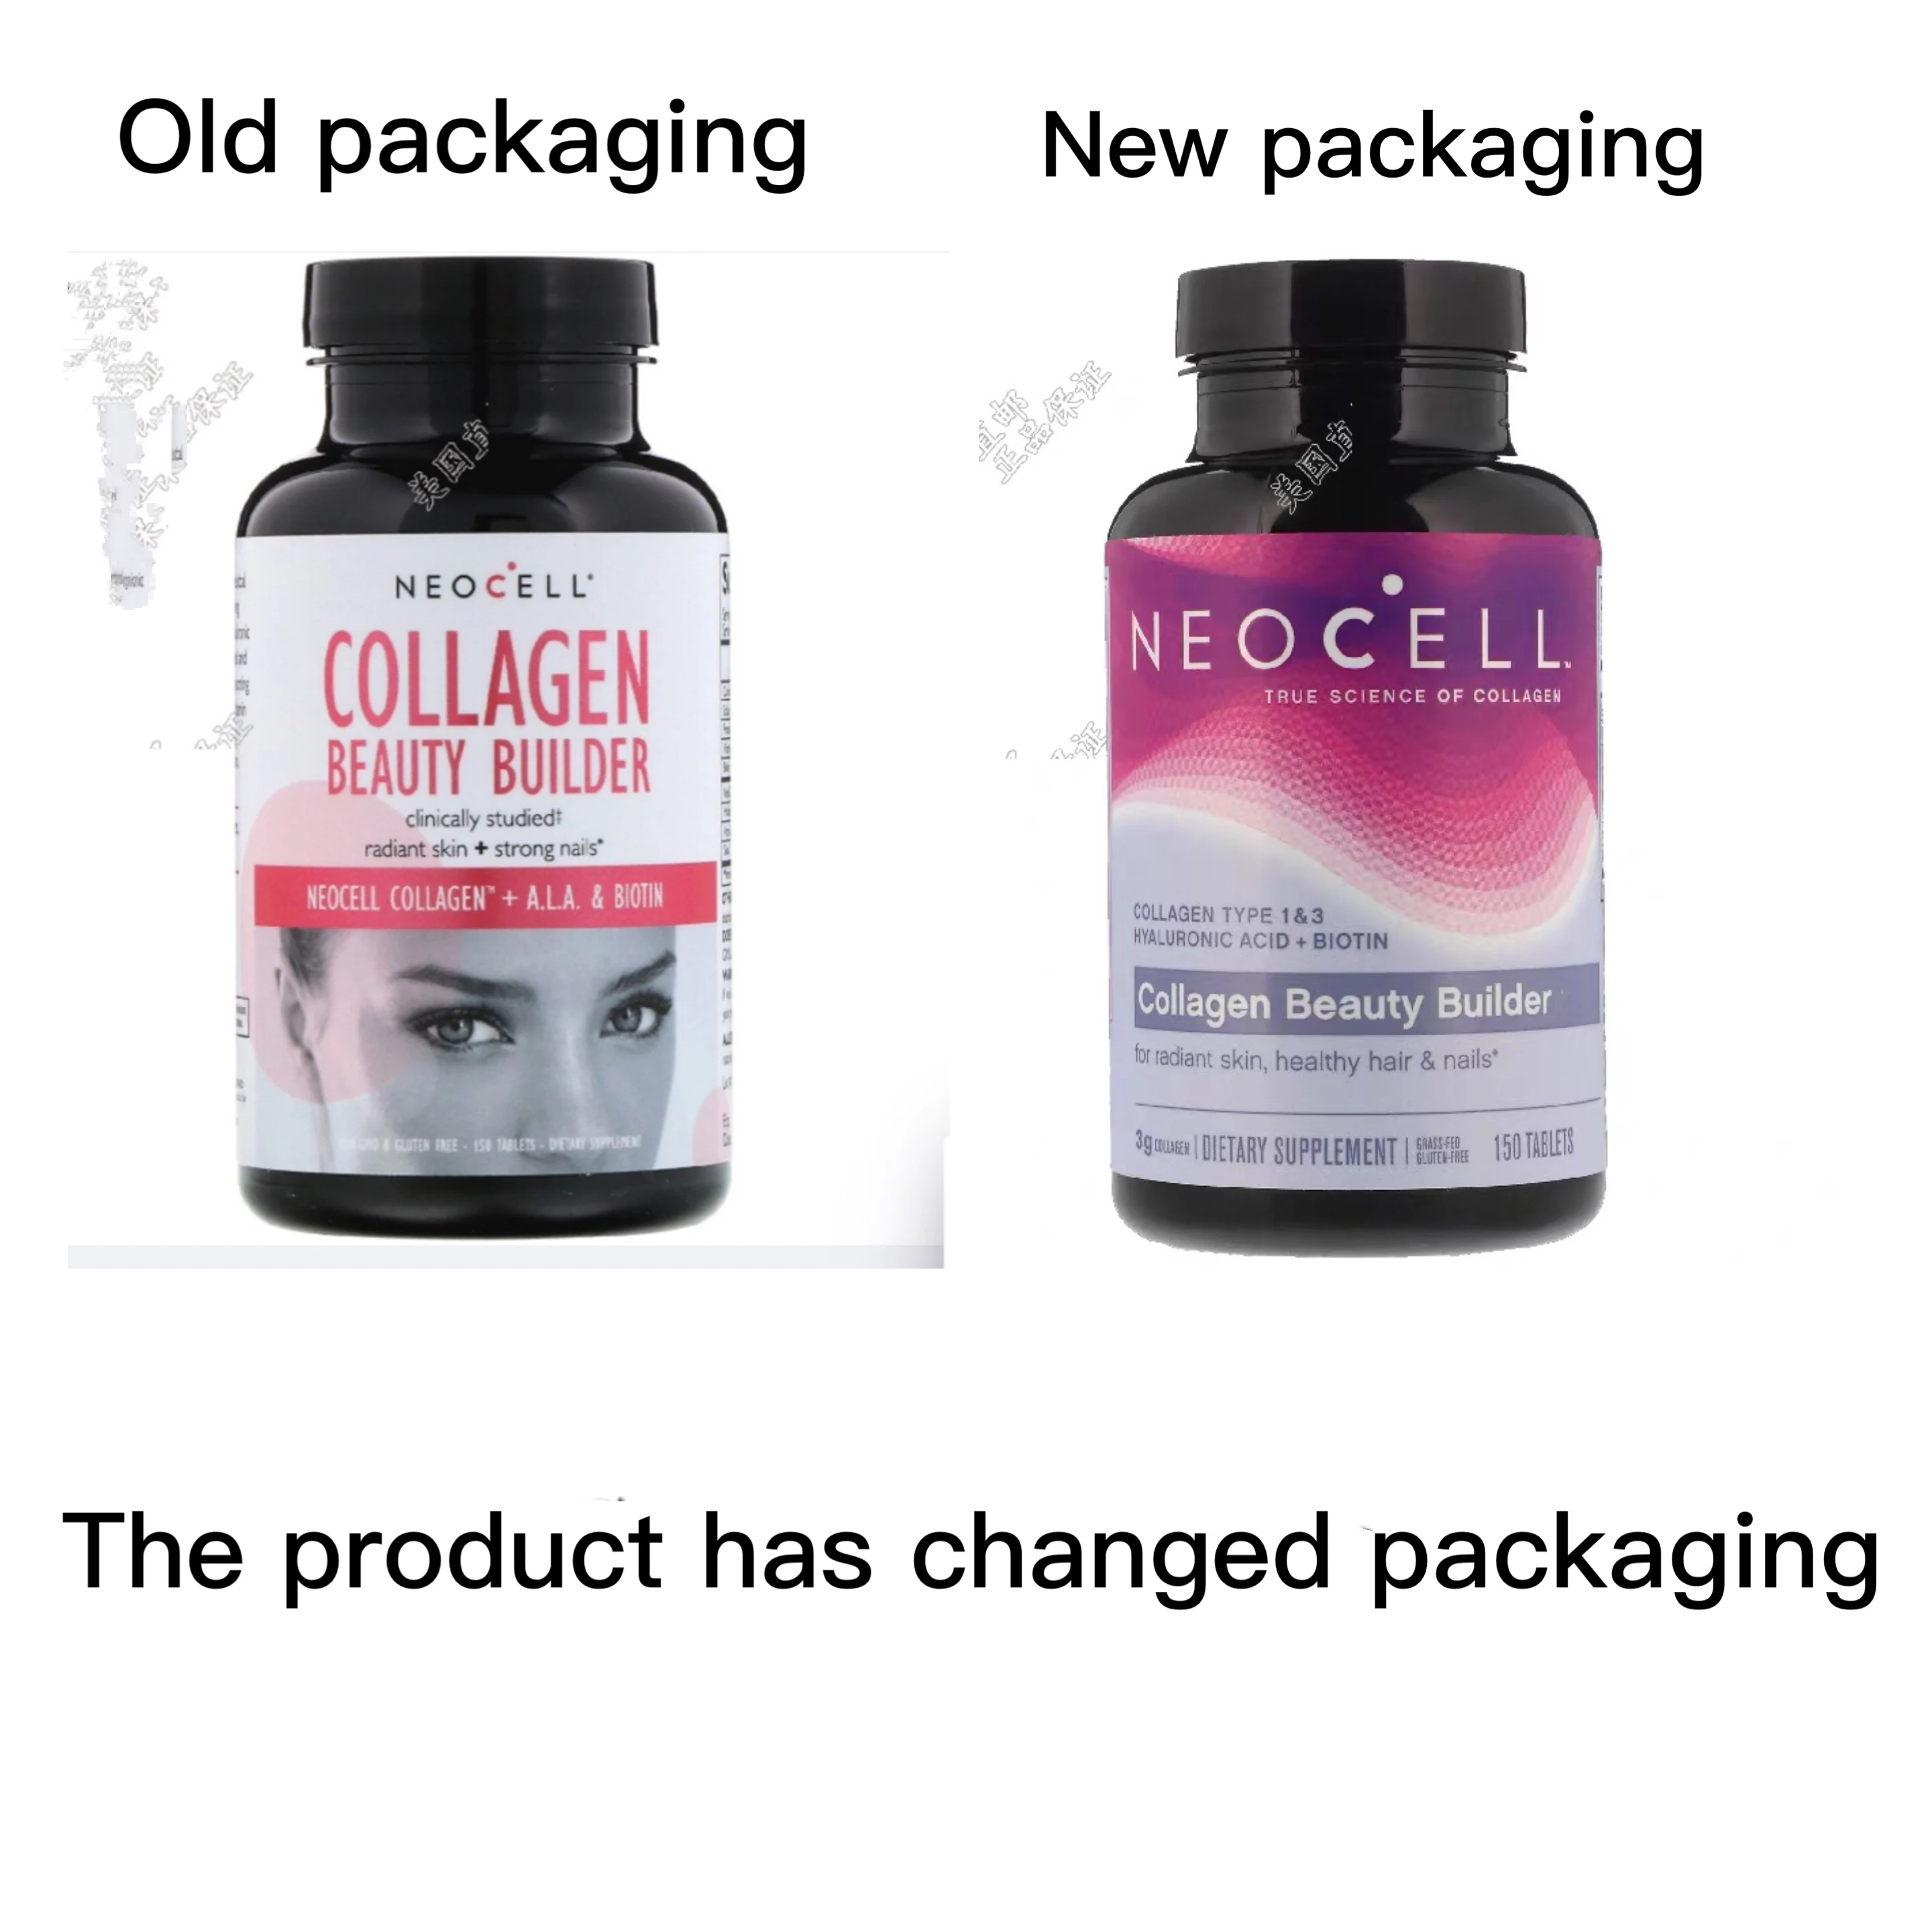 

American NeoCell Beauty Essence Collagen vitamin C lipoic acid biotin hyaluronic acid 150 tablets 1 bottle Free Delivery